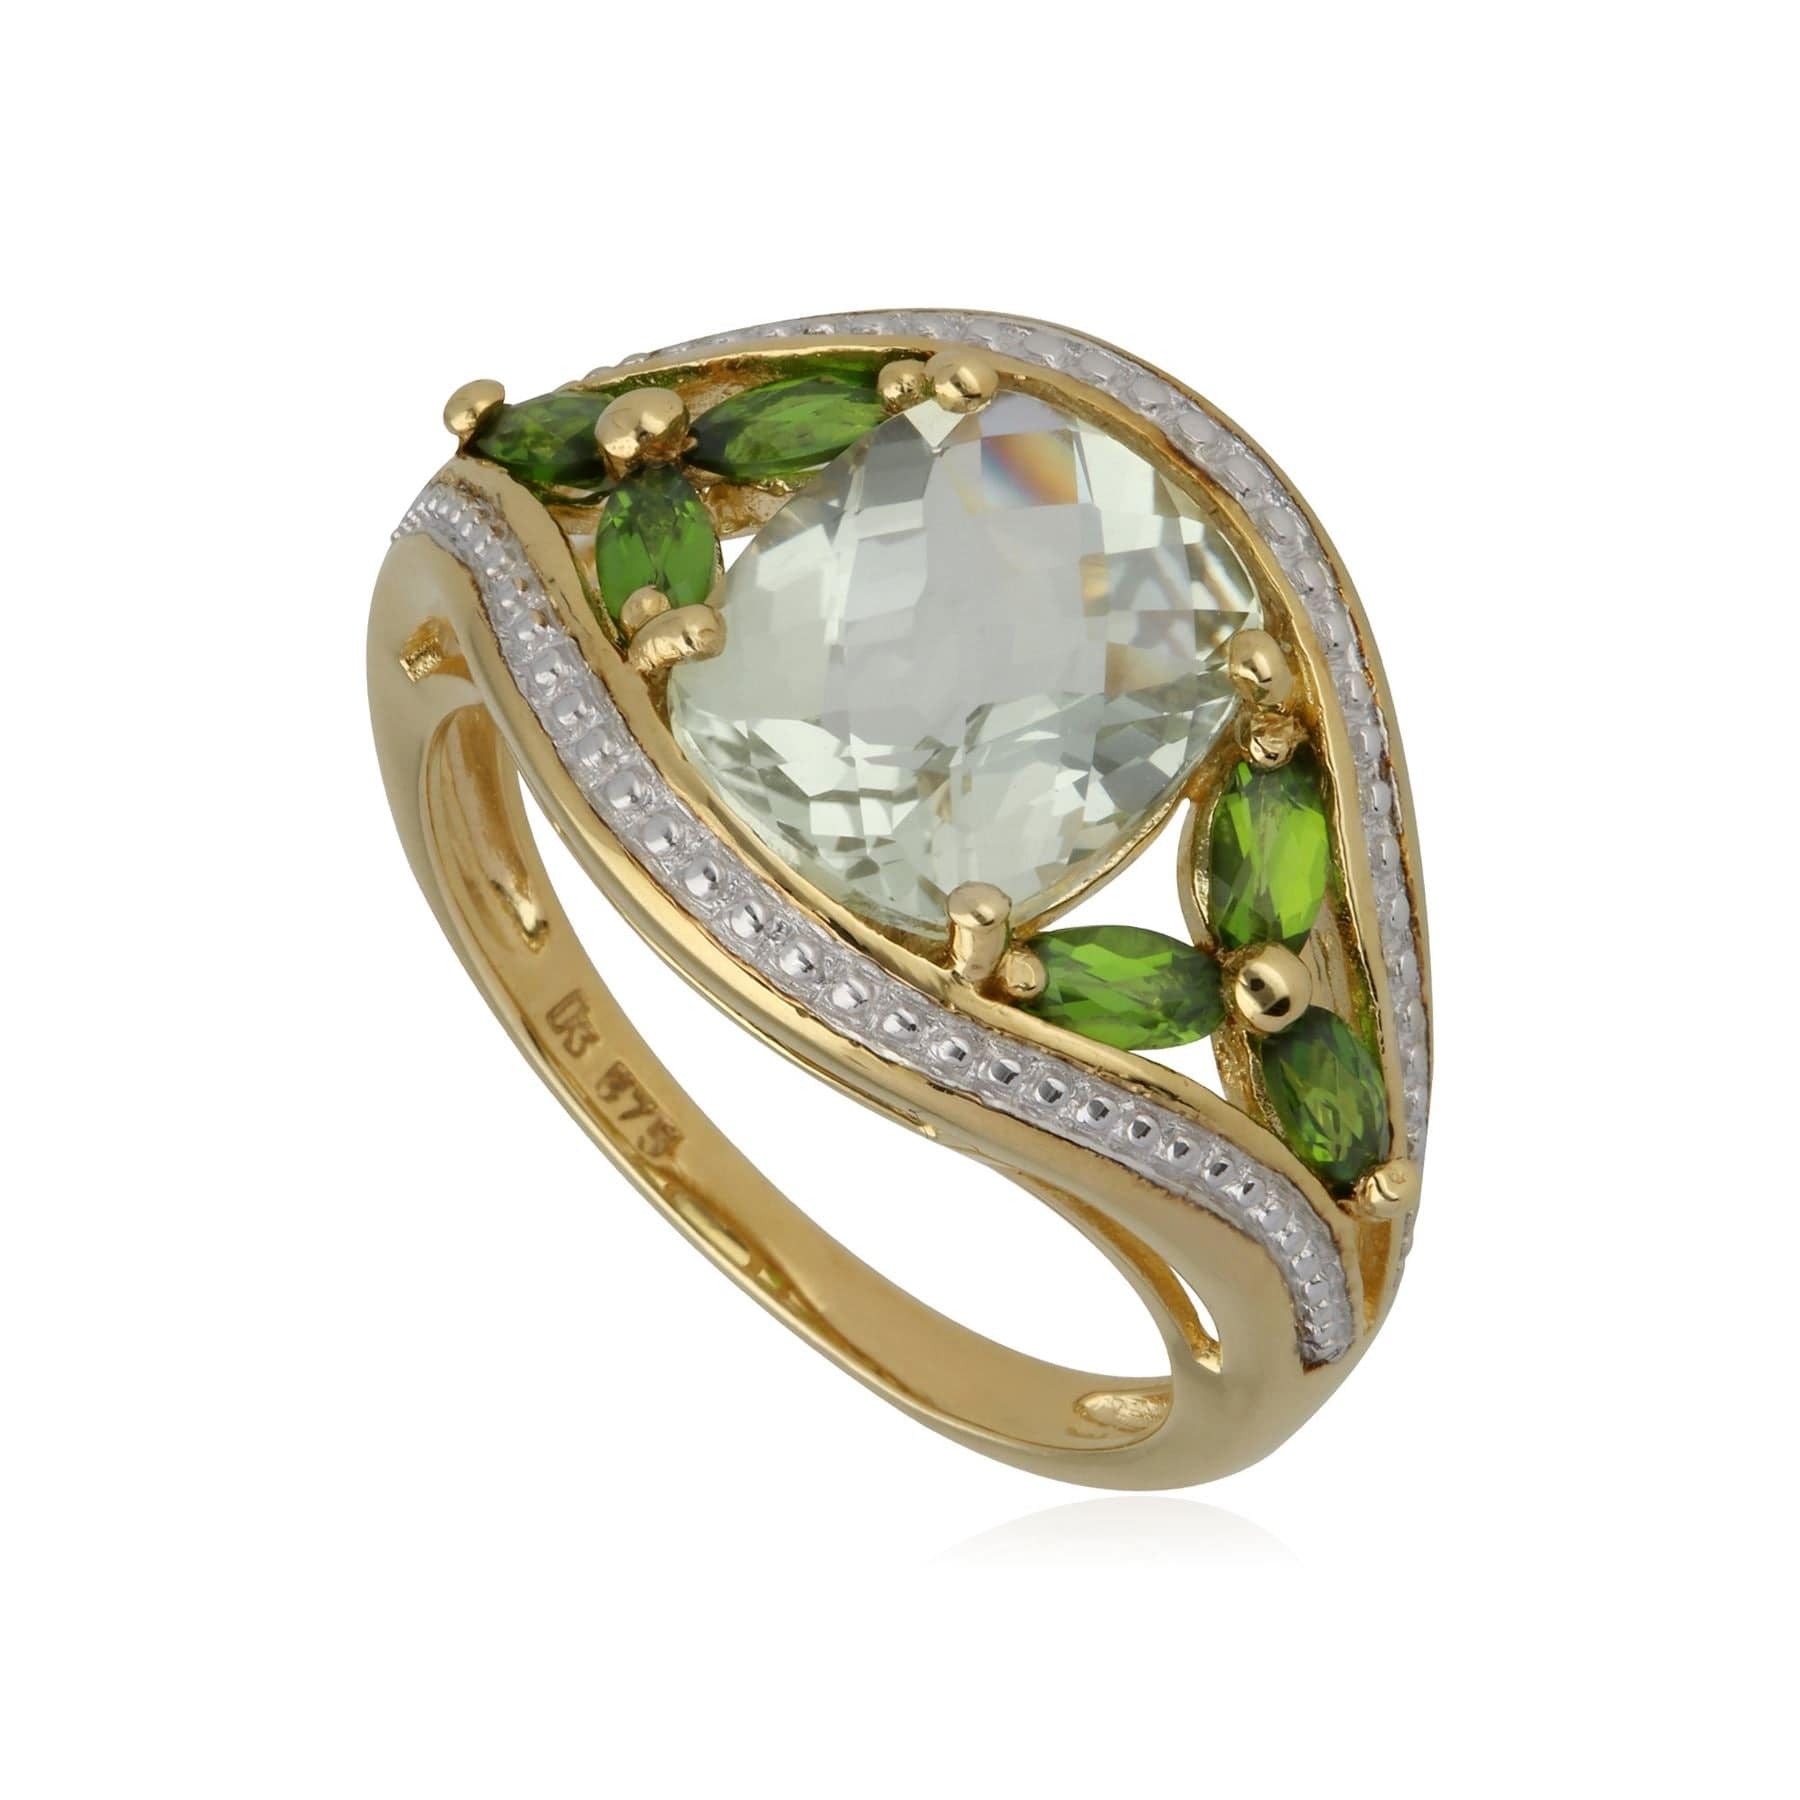 T0358R401917 Kosmos Green Quartz & Chrome Diopside Cocktail Ring in 9ct Yellow Gold 1